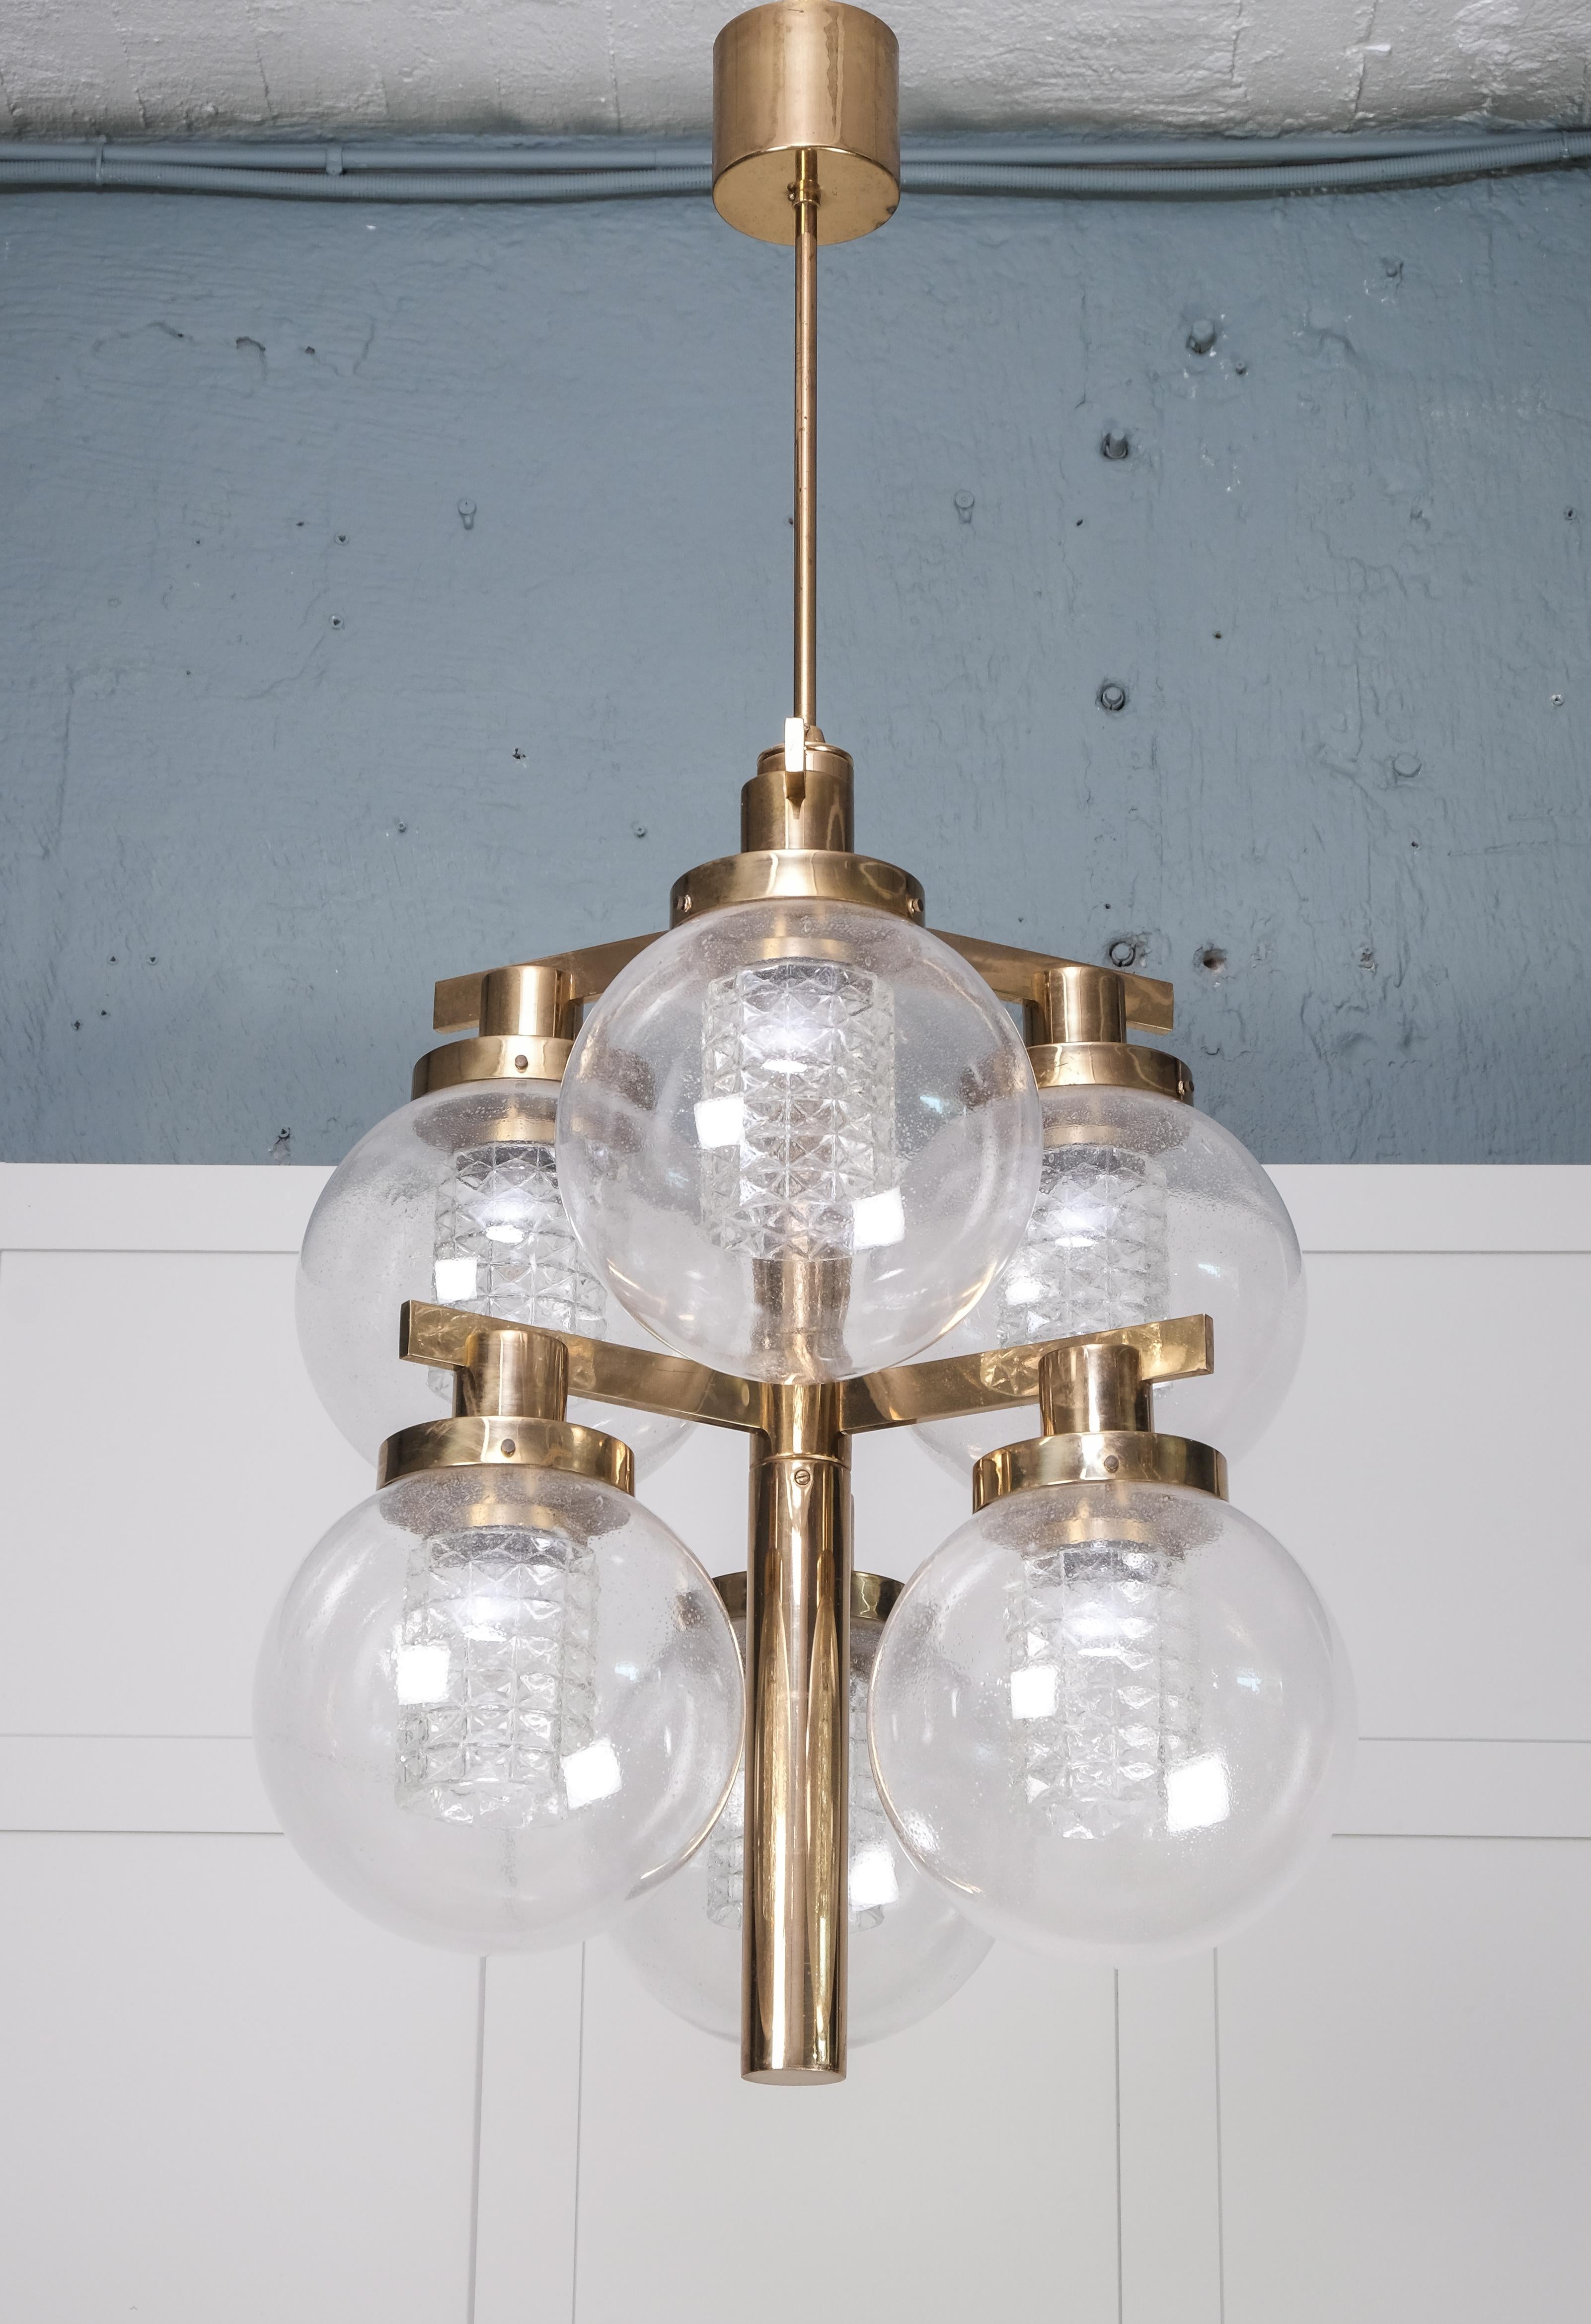 Mid-20th Century Rare Pair of Hans-Agne Jakobsson Brass Chandeliers, 1960s For Sale